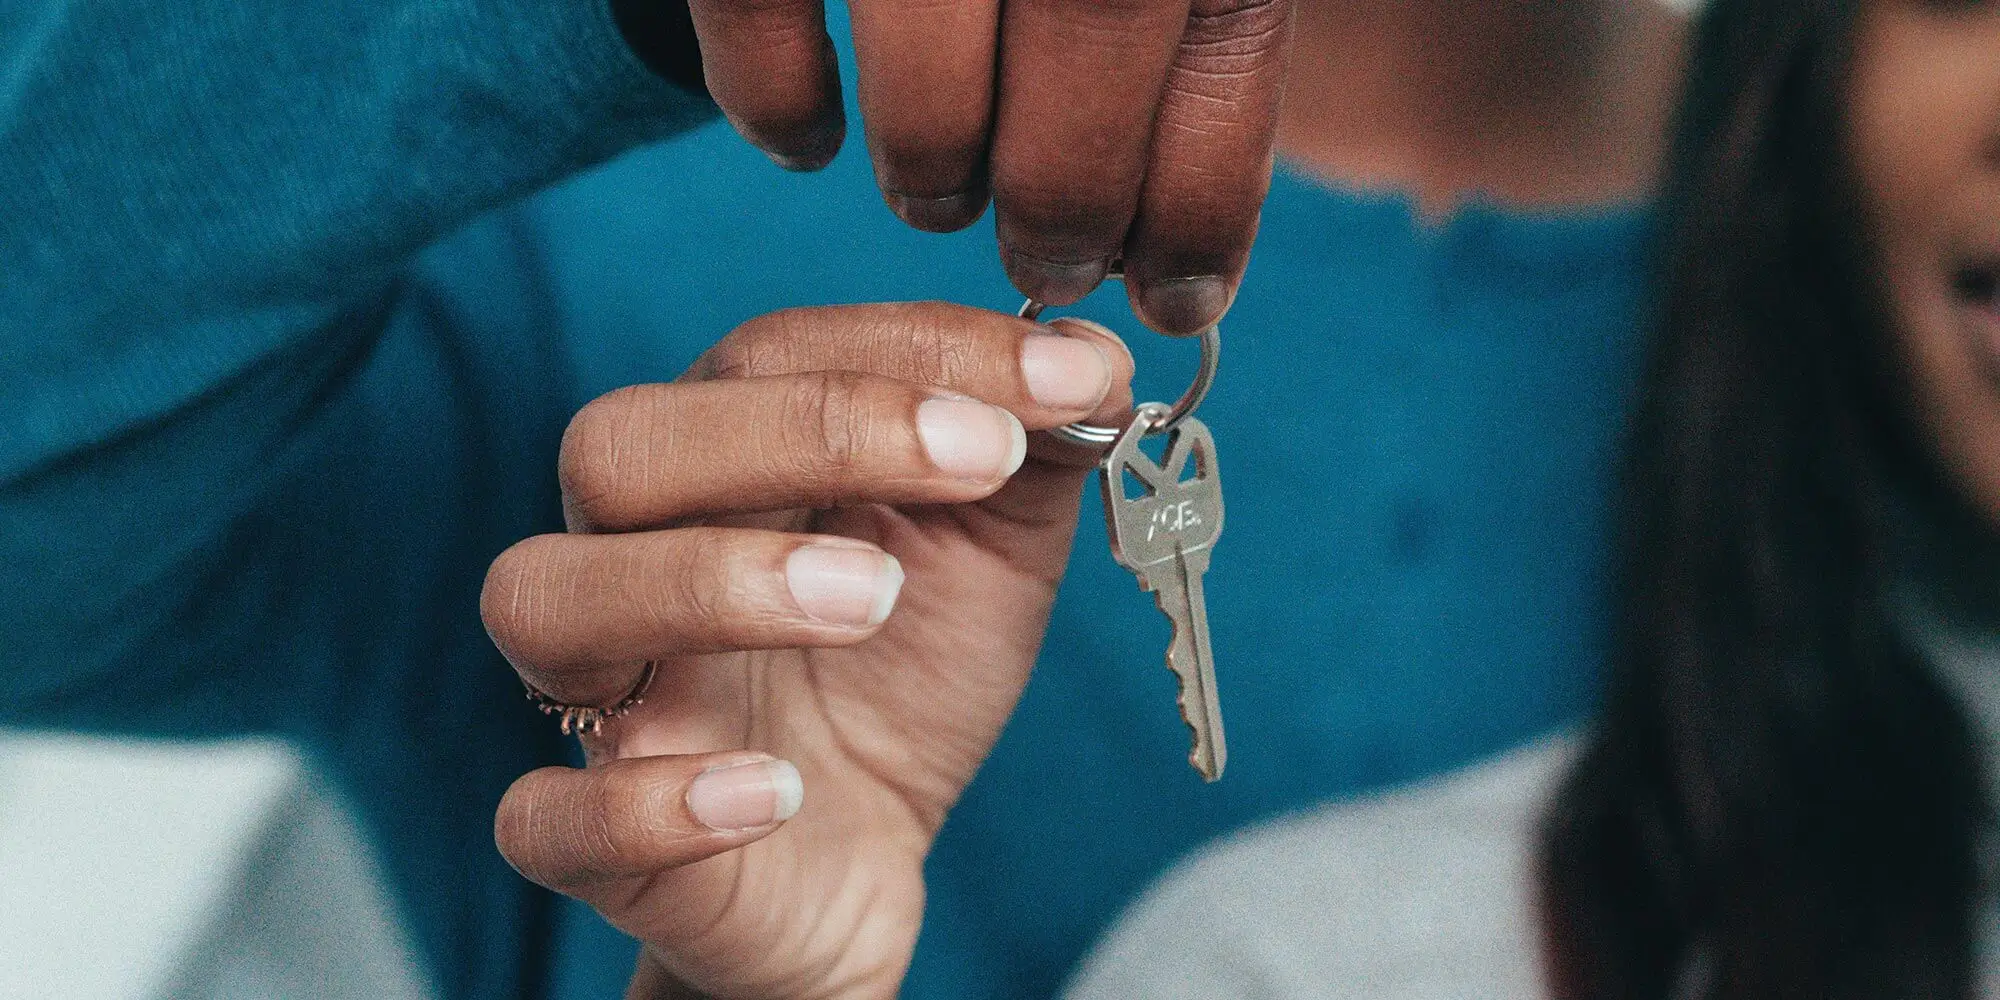 Hands holding house key.